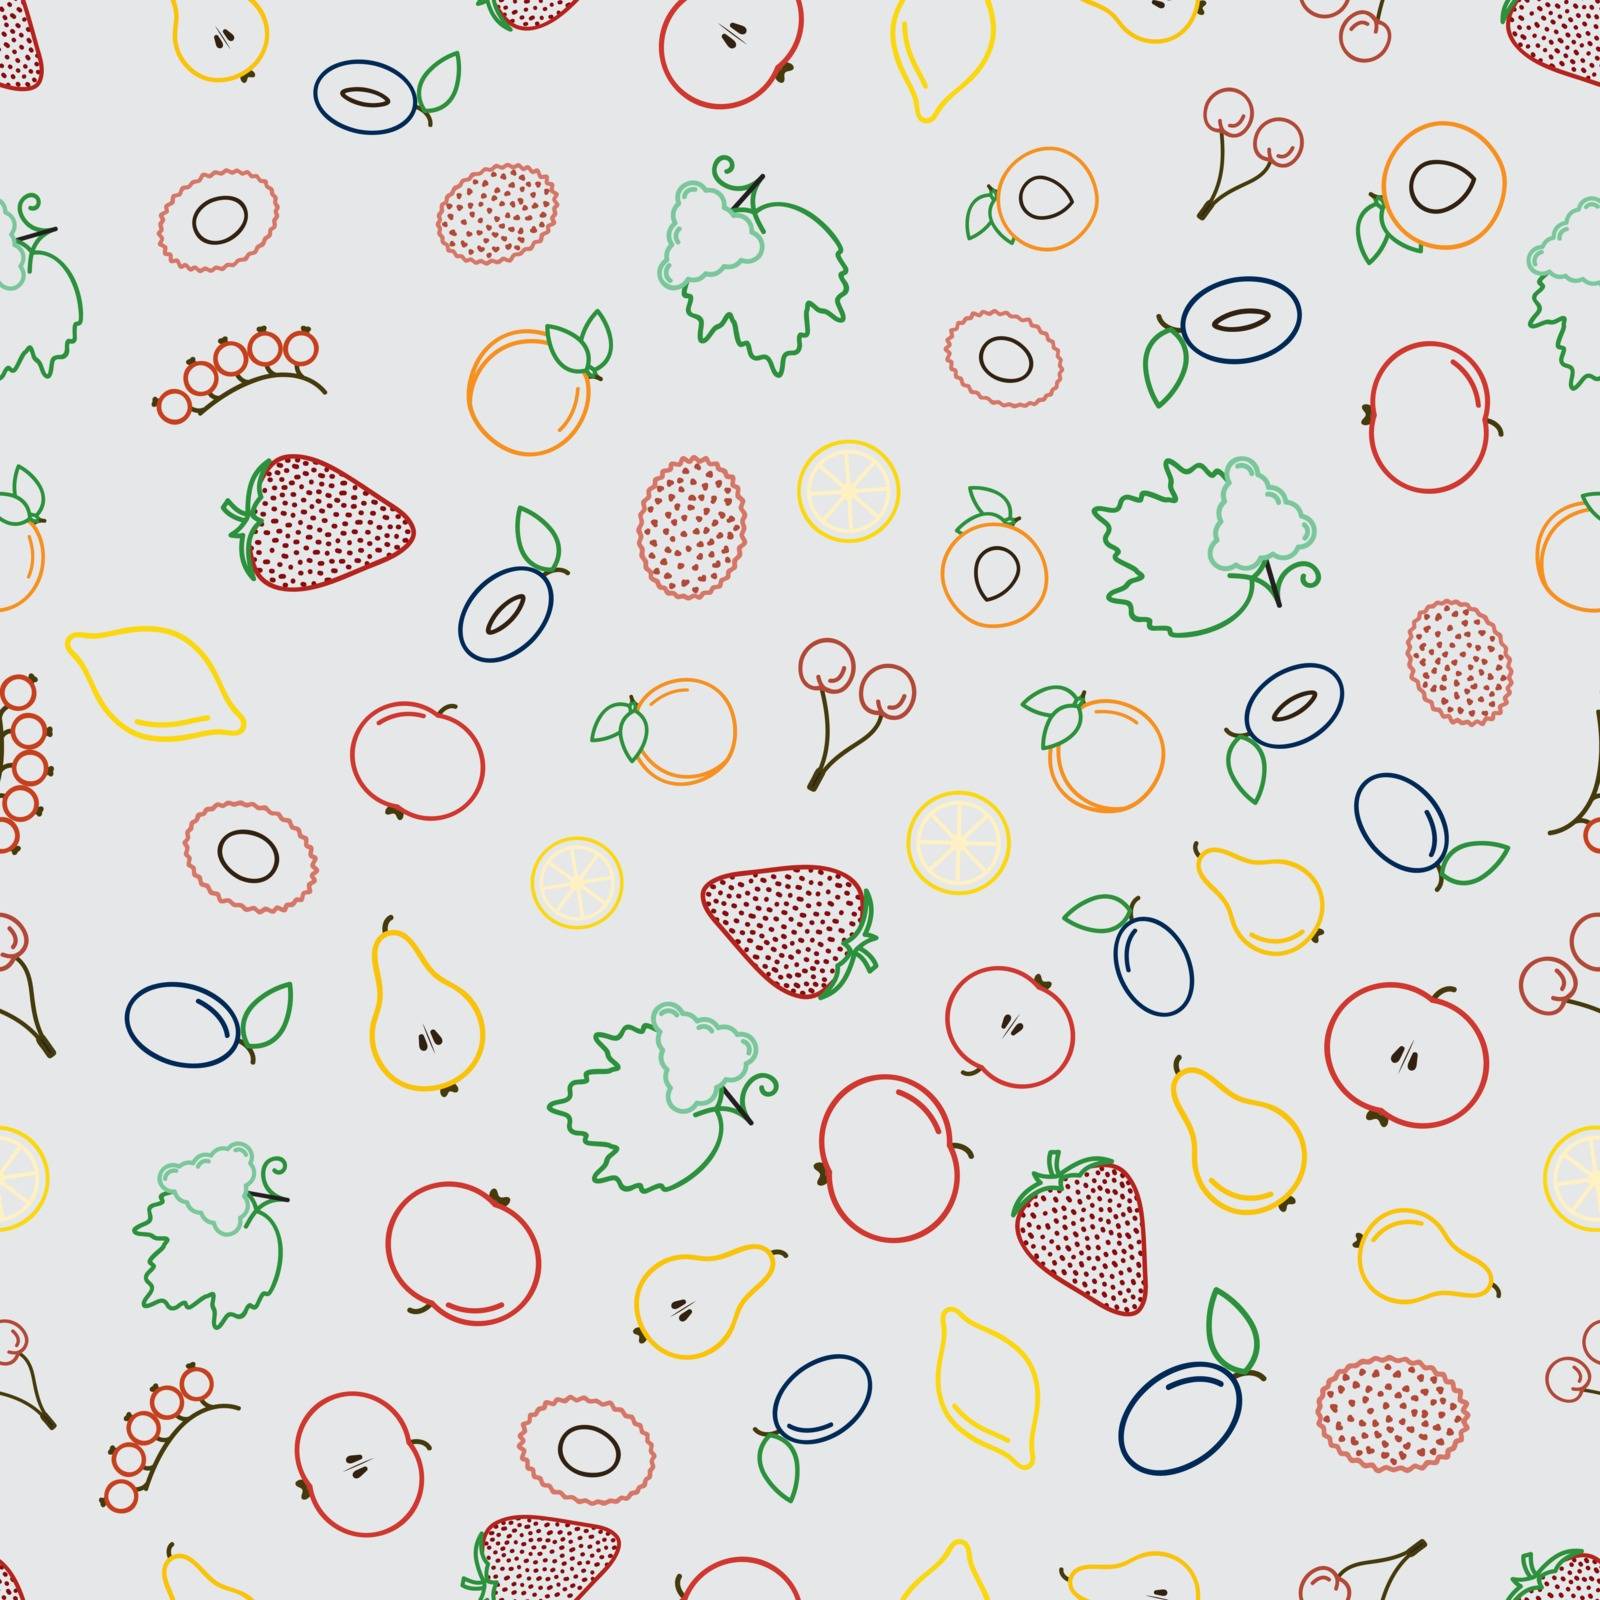 Fruits seamless pattern. Repeating background with linear fruits icons.